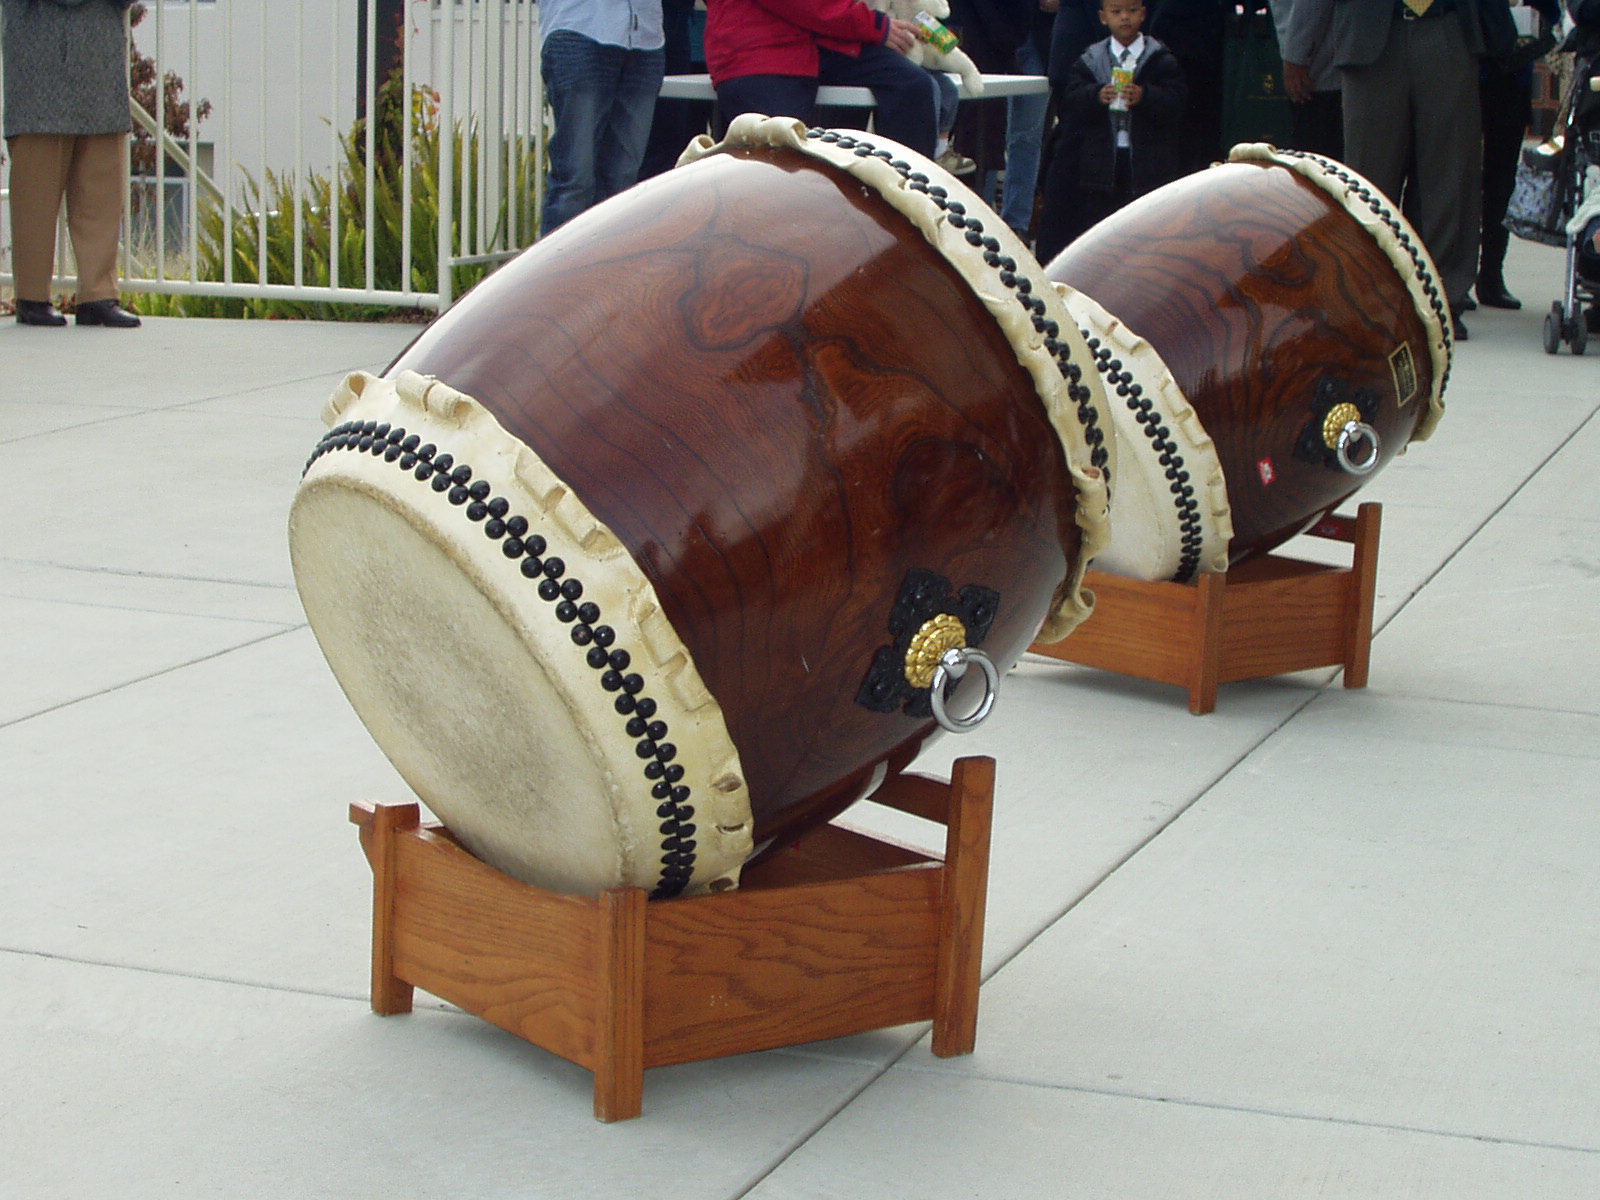 some large wooden instruments are on display